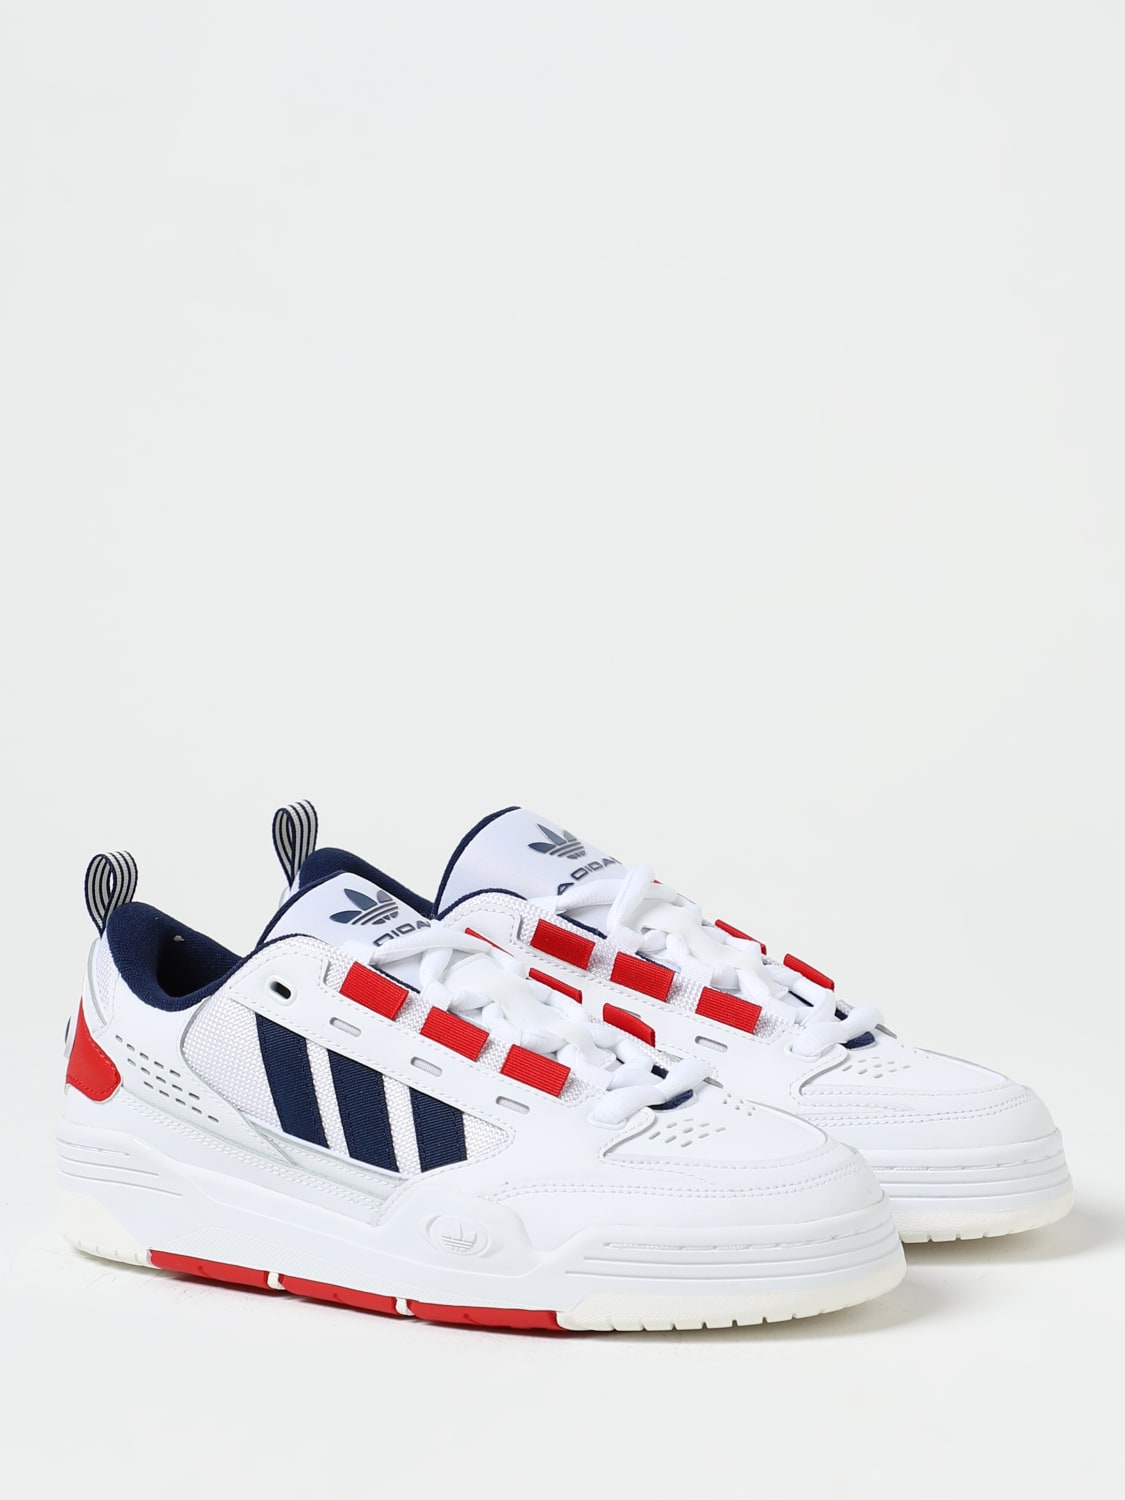 ADIDAS ORIGINALS: ADI2000 sneakers in leather and mesh - White | Adidas  Originals sneakers ID2103 online at | Sneaker low